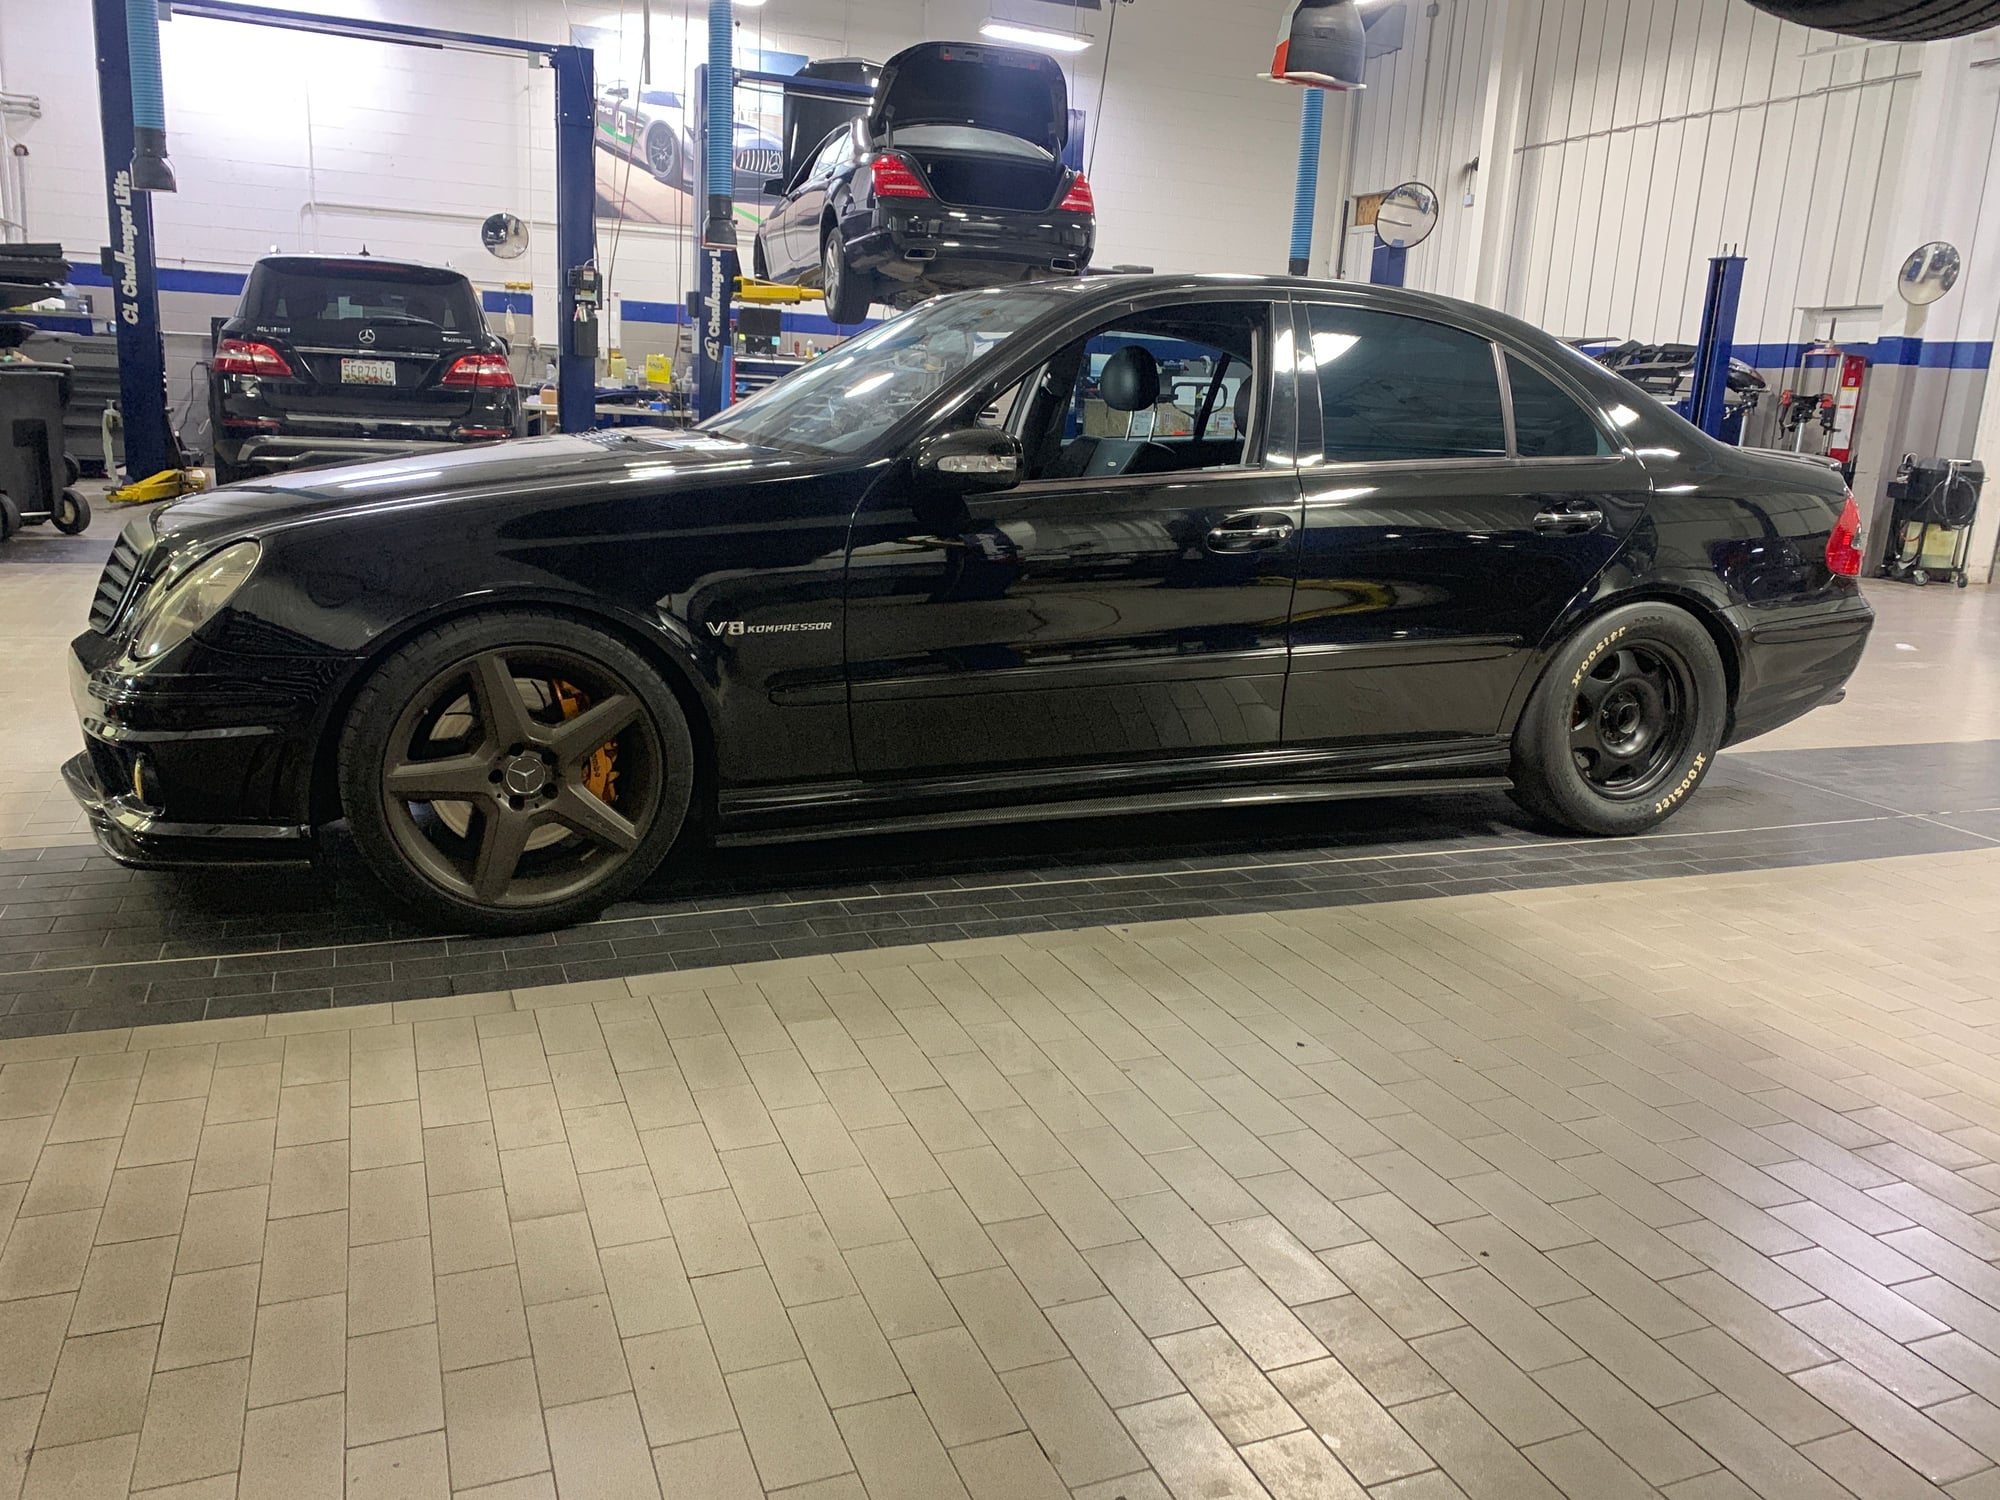 2005 Mercedes-Benz E55 AMG - 2005 E55 AMG Weistec Supercharged. 700whp/860wtq! Record setting! 70k miles - Used - VIN Wdbuf76j55a768758 - 70,400 Miles - 8 cyl - 2WD - Automatic - Sedan - Black - Catonsville, MD 21228, United States